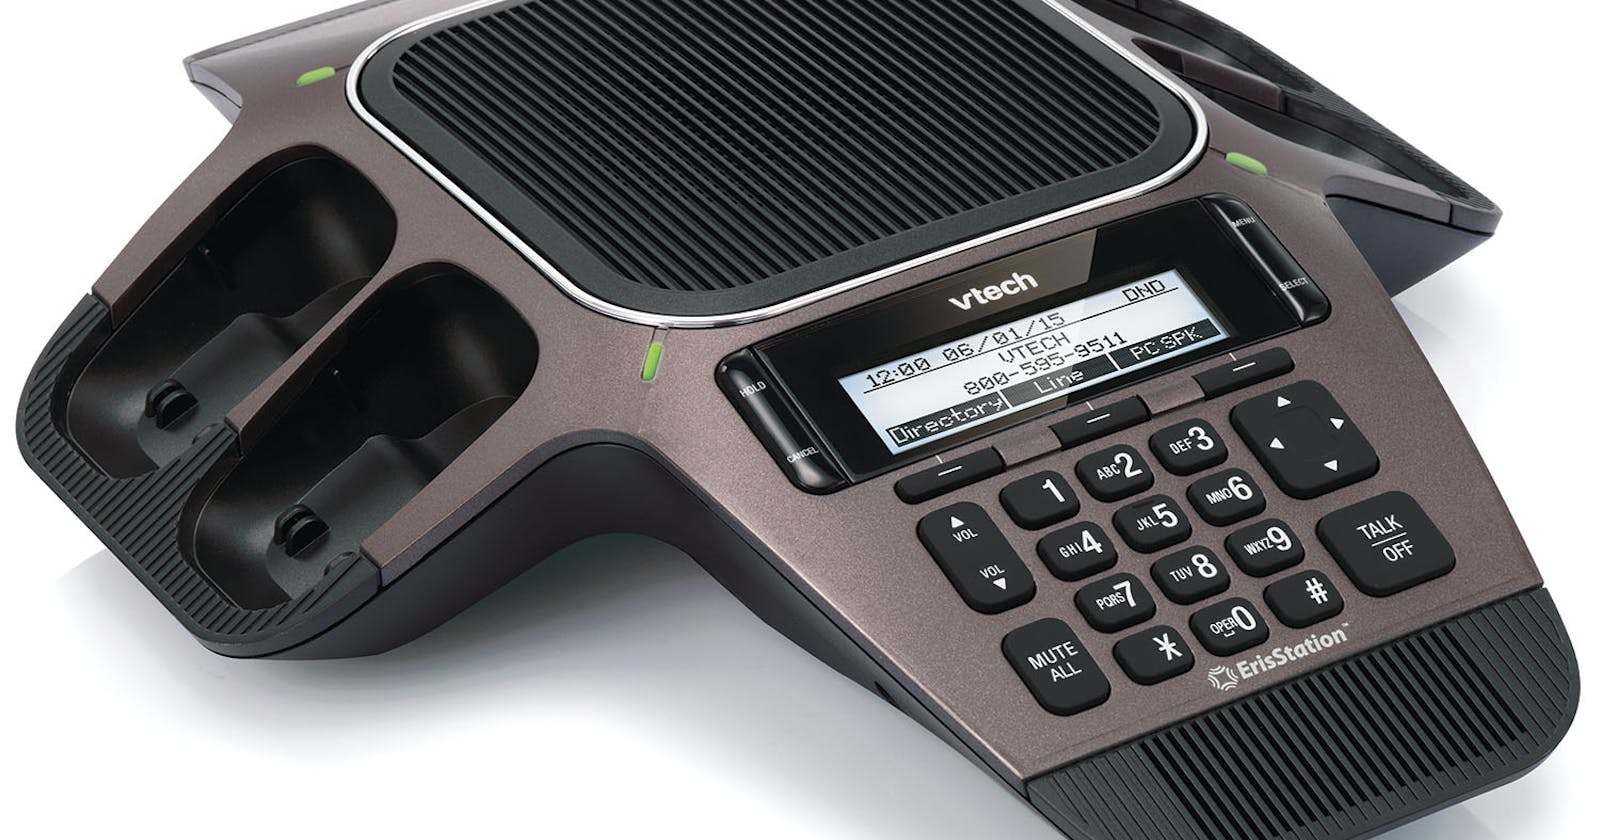 Vulnerability in VTech VCS754a Business Phones Exposes SIP Credentials